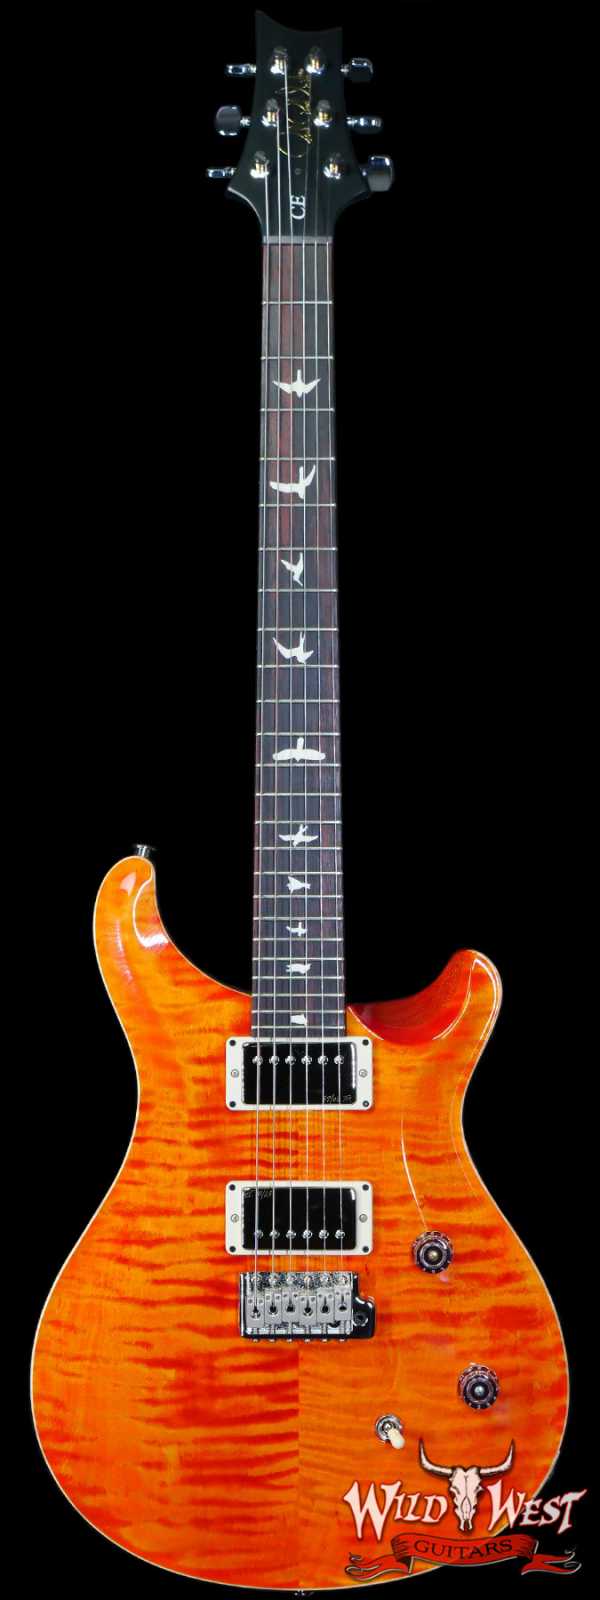 Paul Reed Smith PRS Wild West Guitars 2023 Special Run CE 24 Painted Black Neck 57/08 Pickups Orange